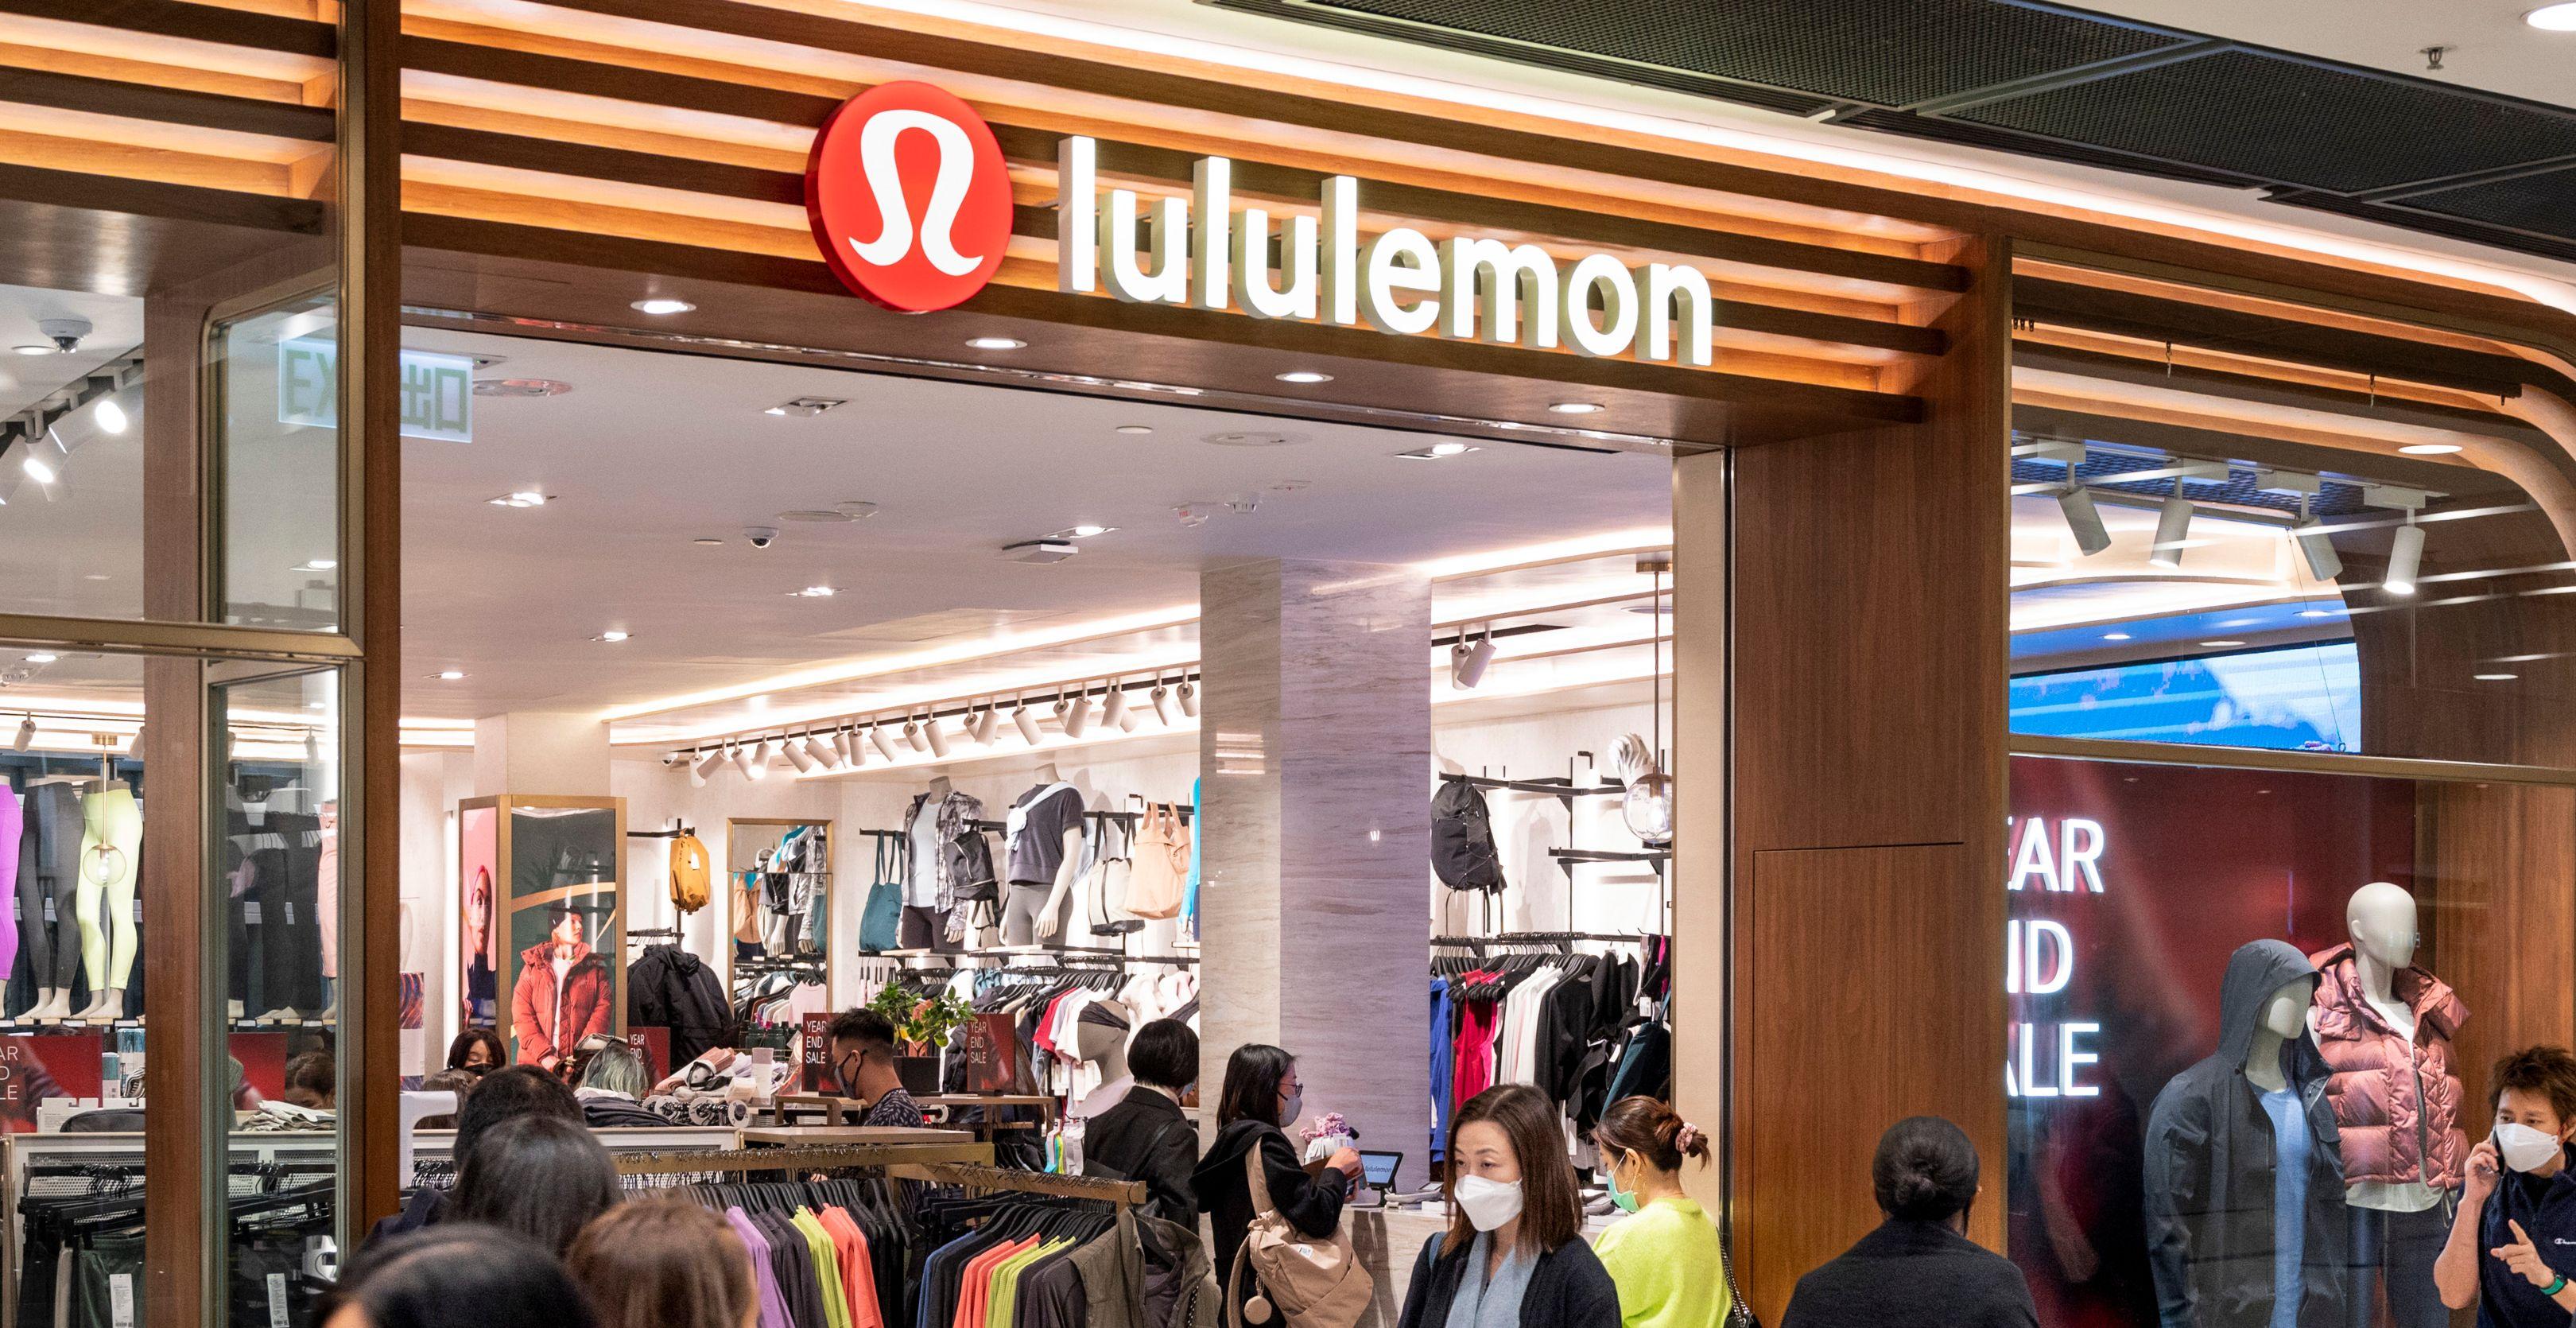 lululemon 's military, first responder and medical discount takes 15% off  your purchase